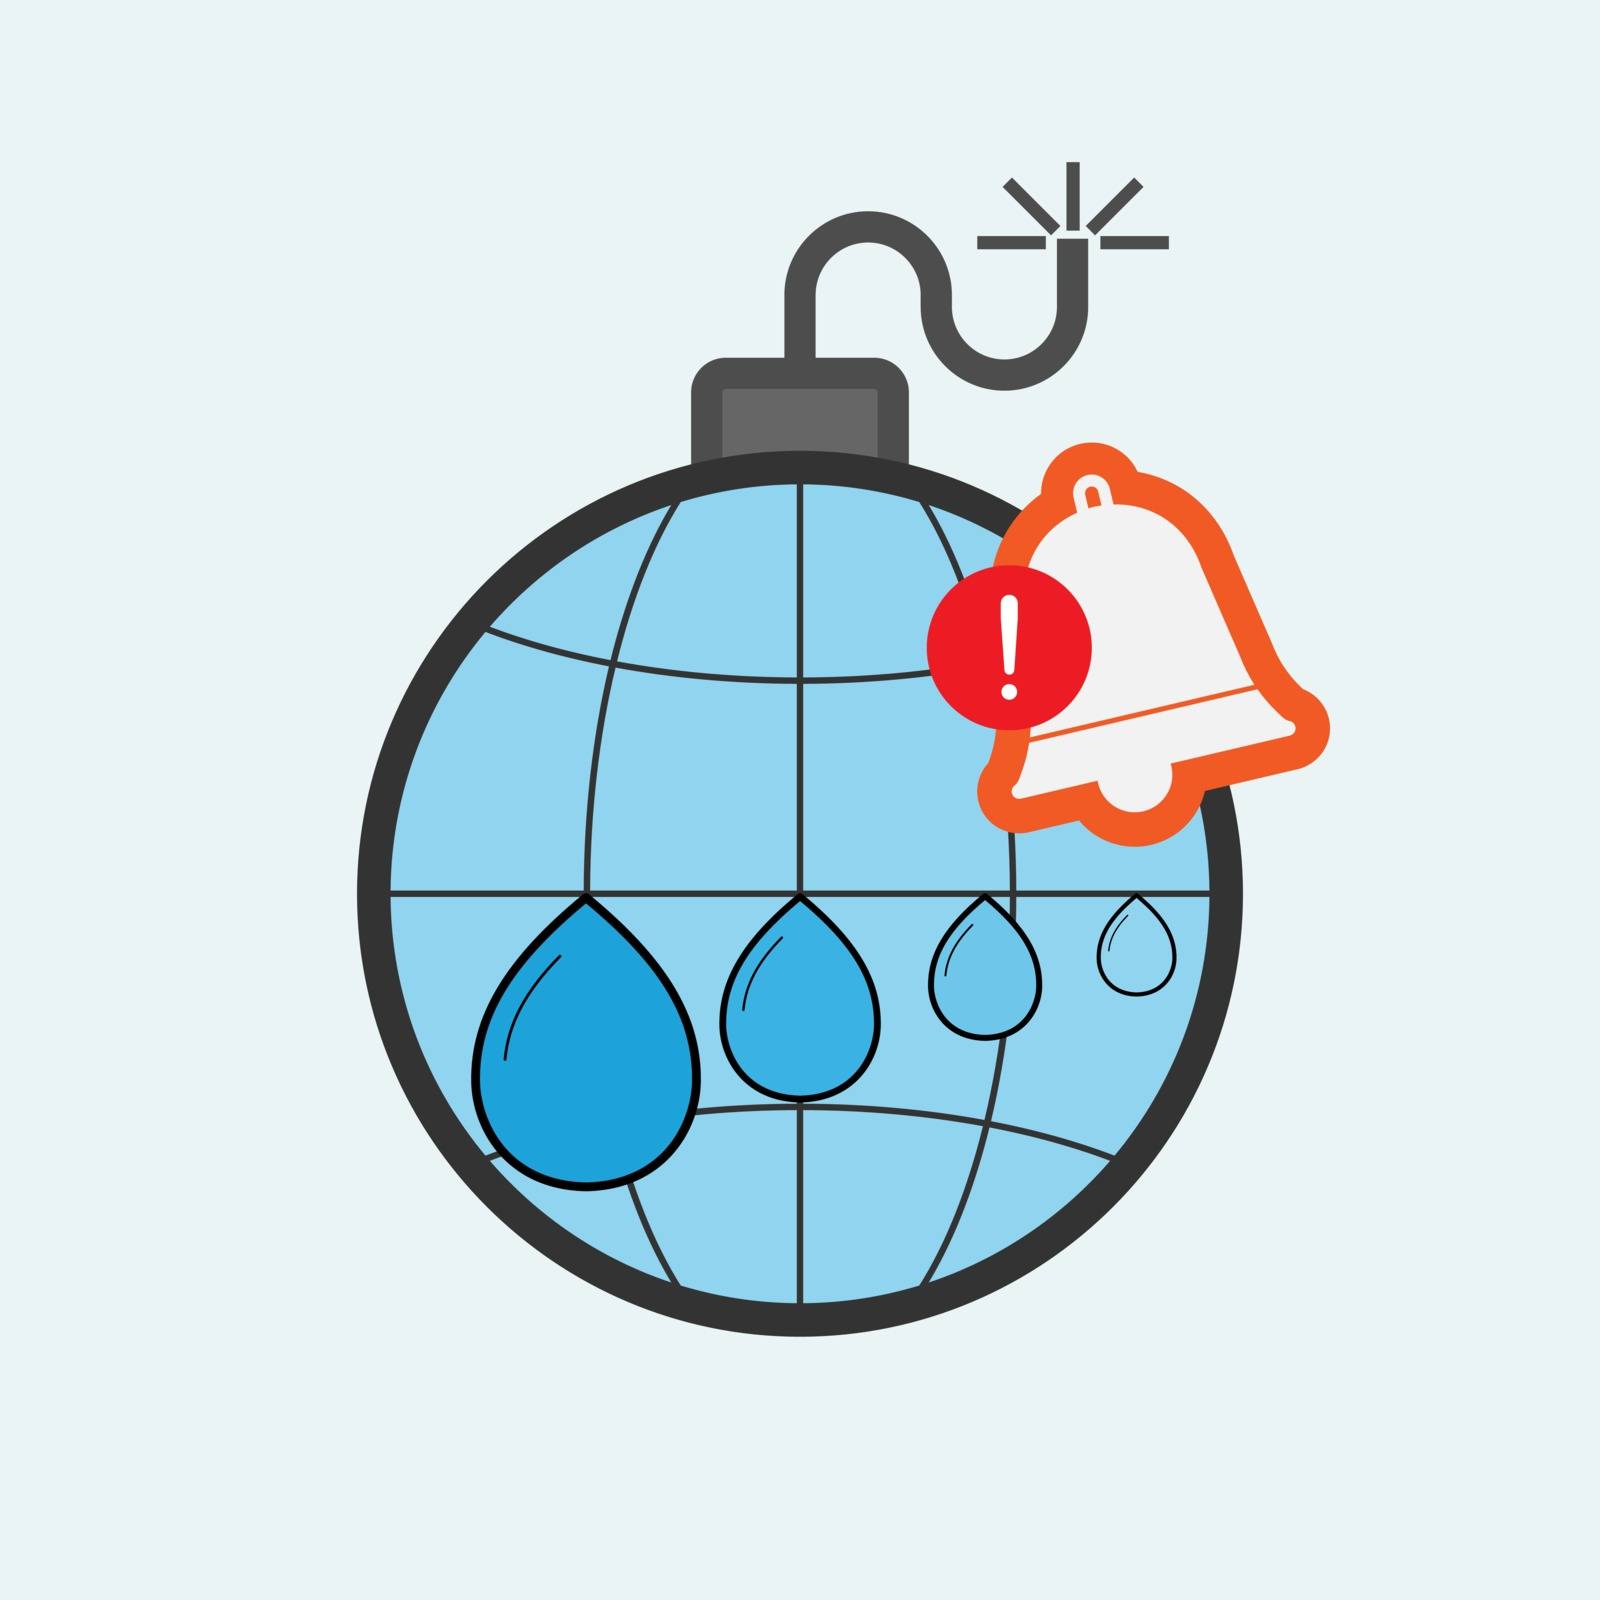 Time bomb concept. Water risk metaphor. Raise public awareness of water crisis. Water scarcity, water stress alert symbol. Vector illustration flat design style.